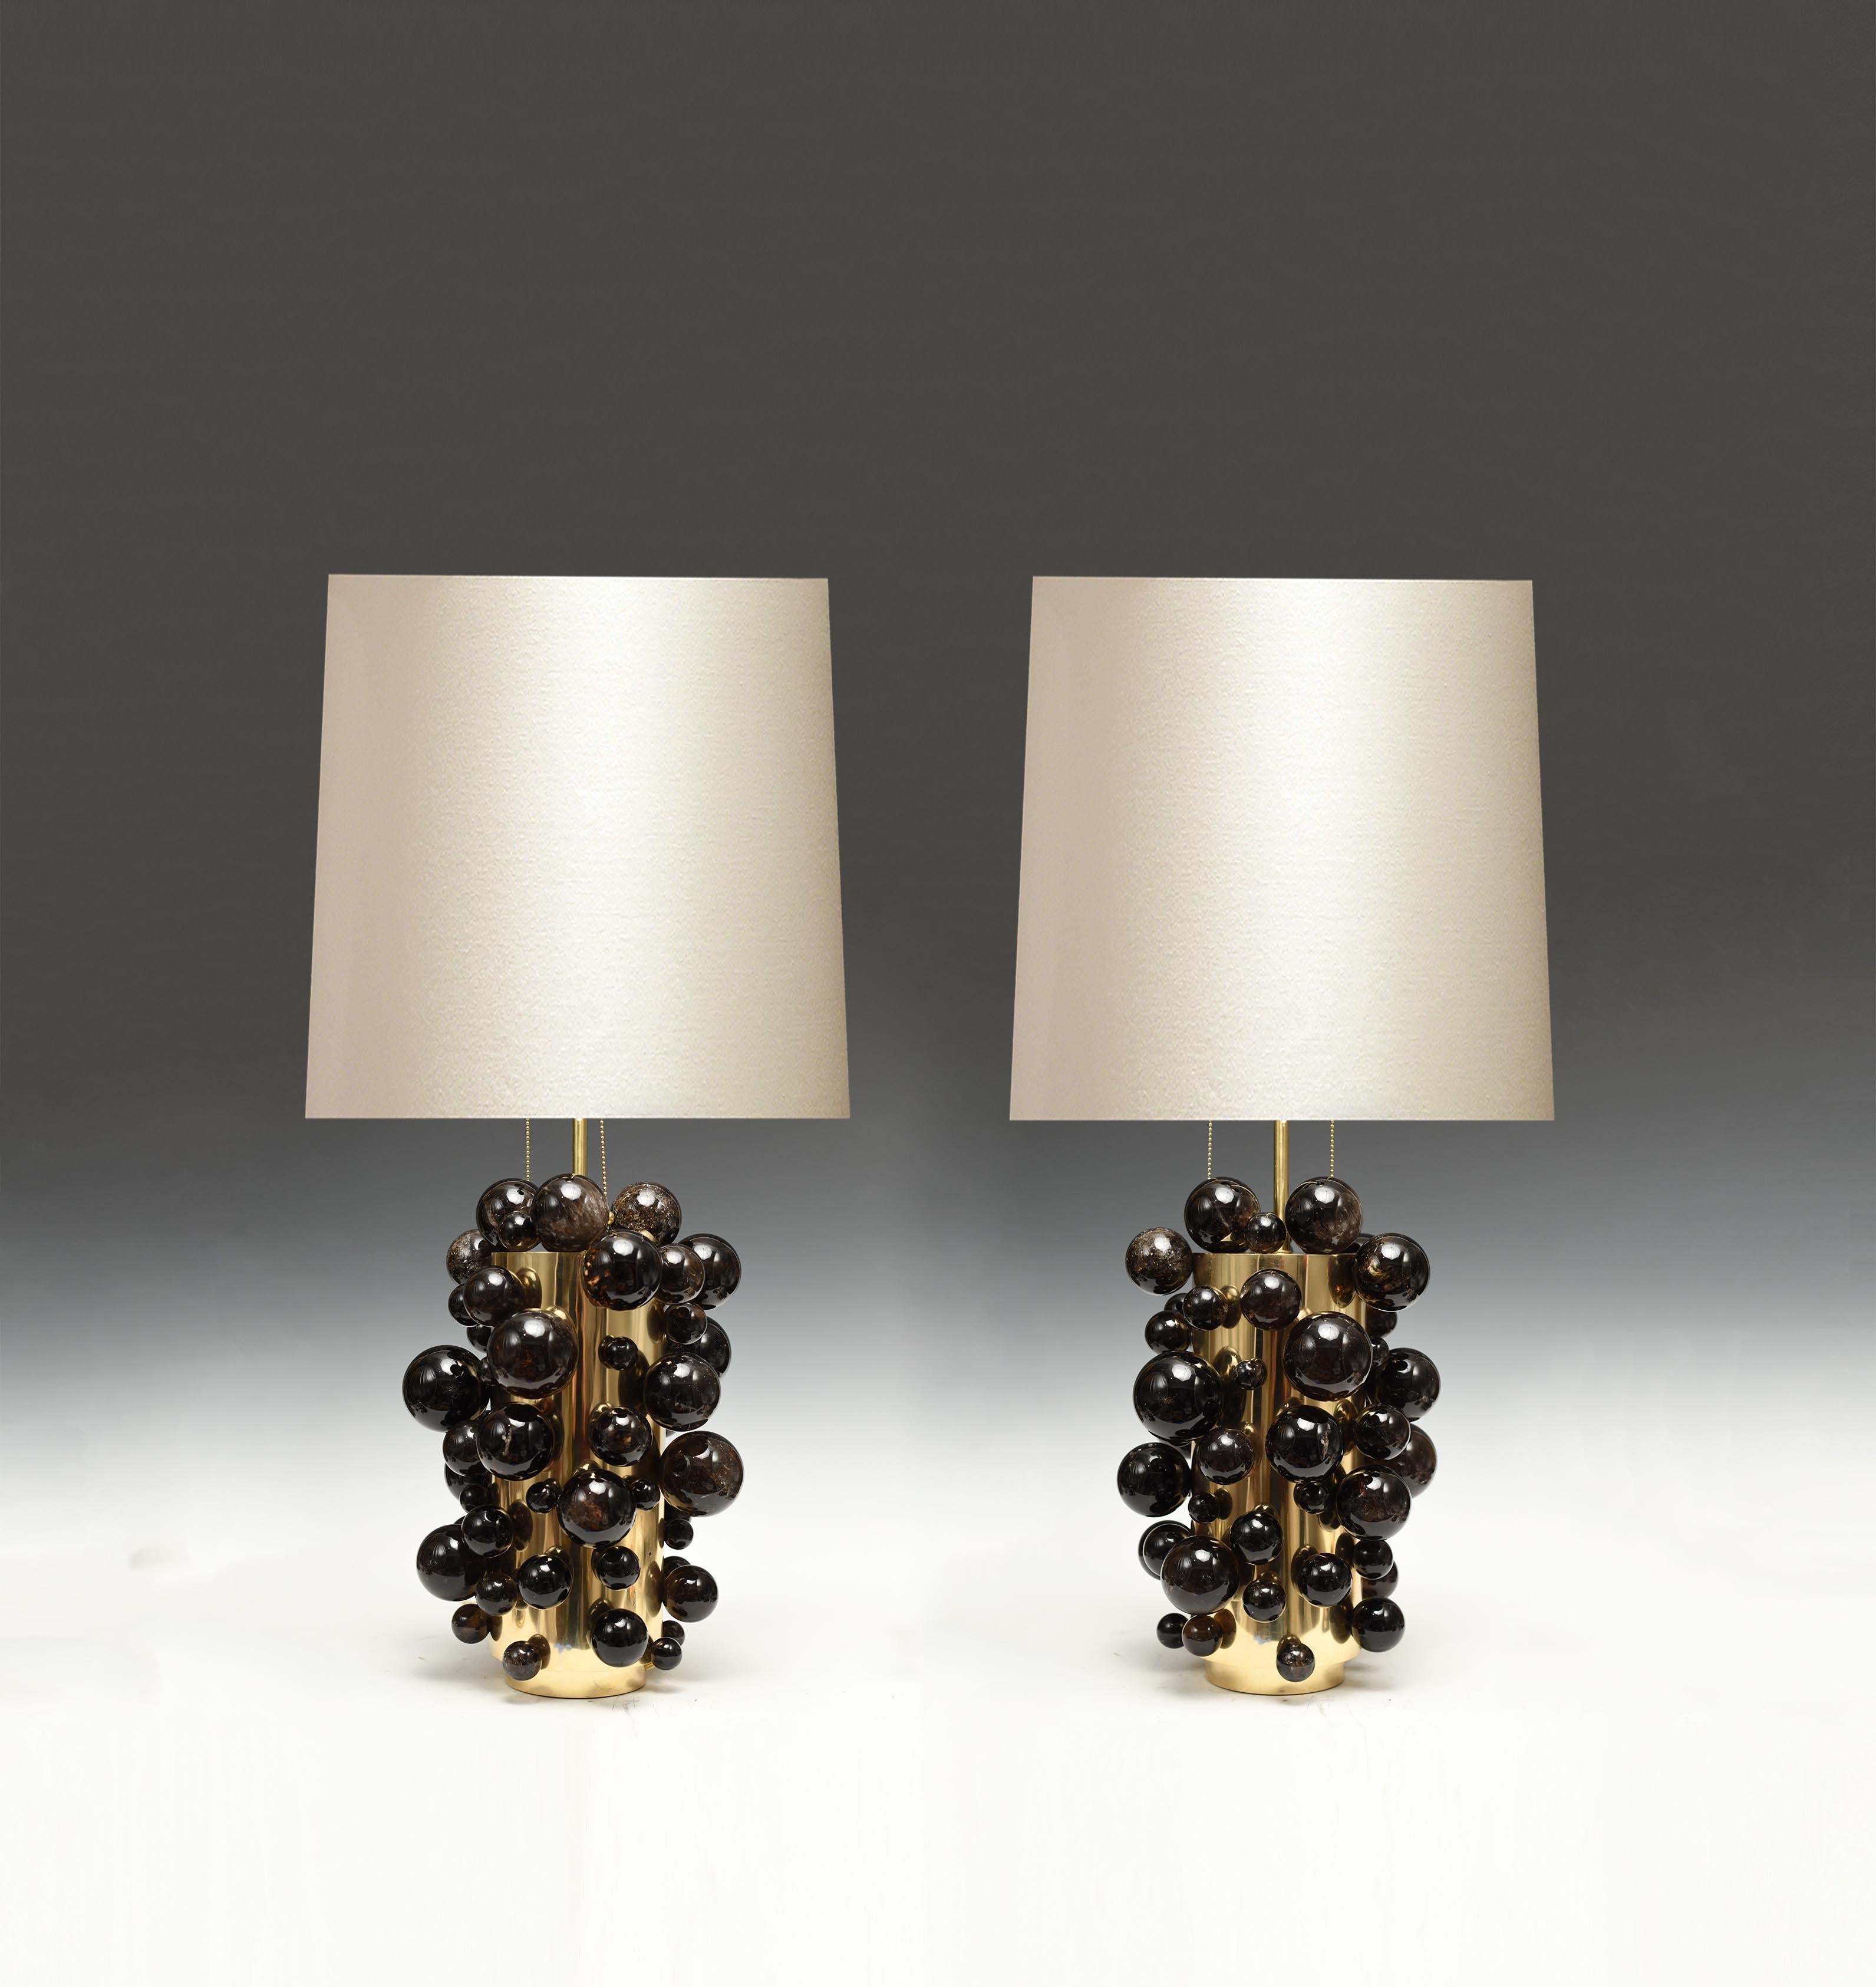 Single luxury dark rock crystal quartz bulb lamps with polished brass frames. Created by Phoenix Gallery, NYC.
Each lamp installed two sockets.
To the top of the rock crystal 17 inch.
Lampshade not included.
 